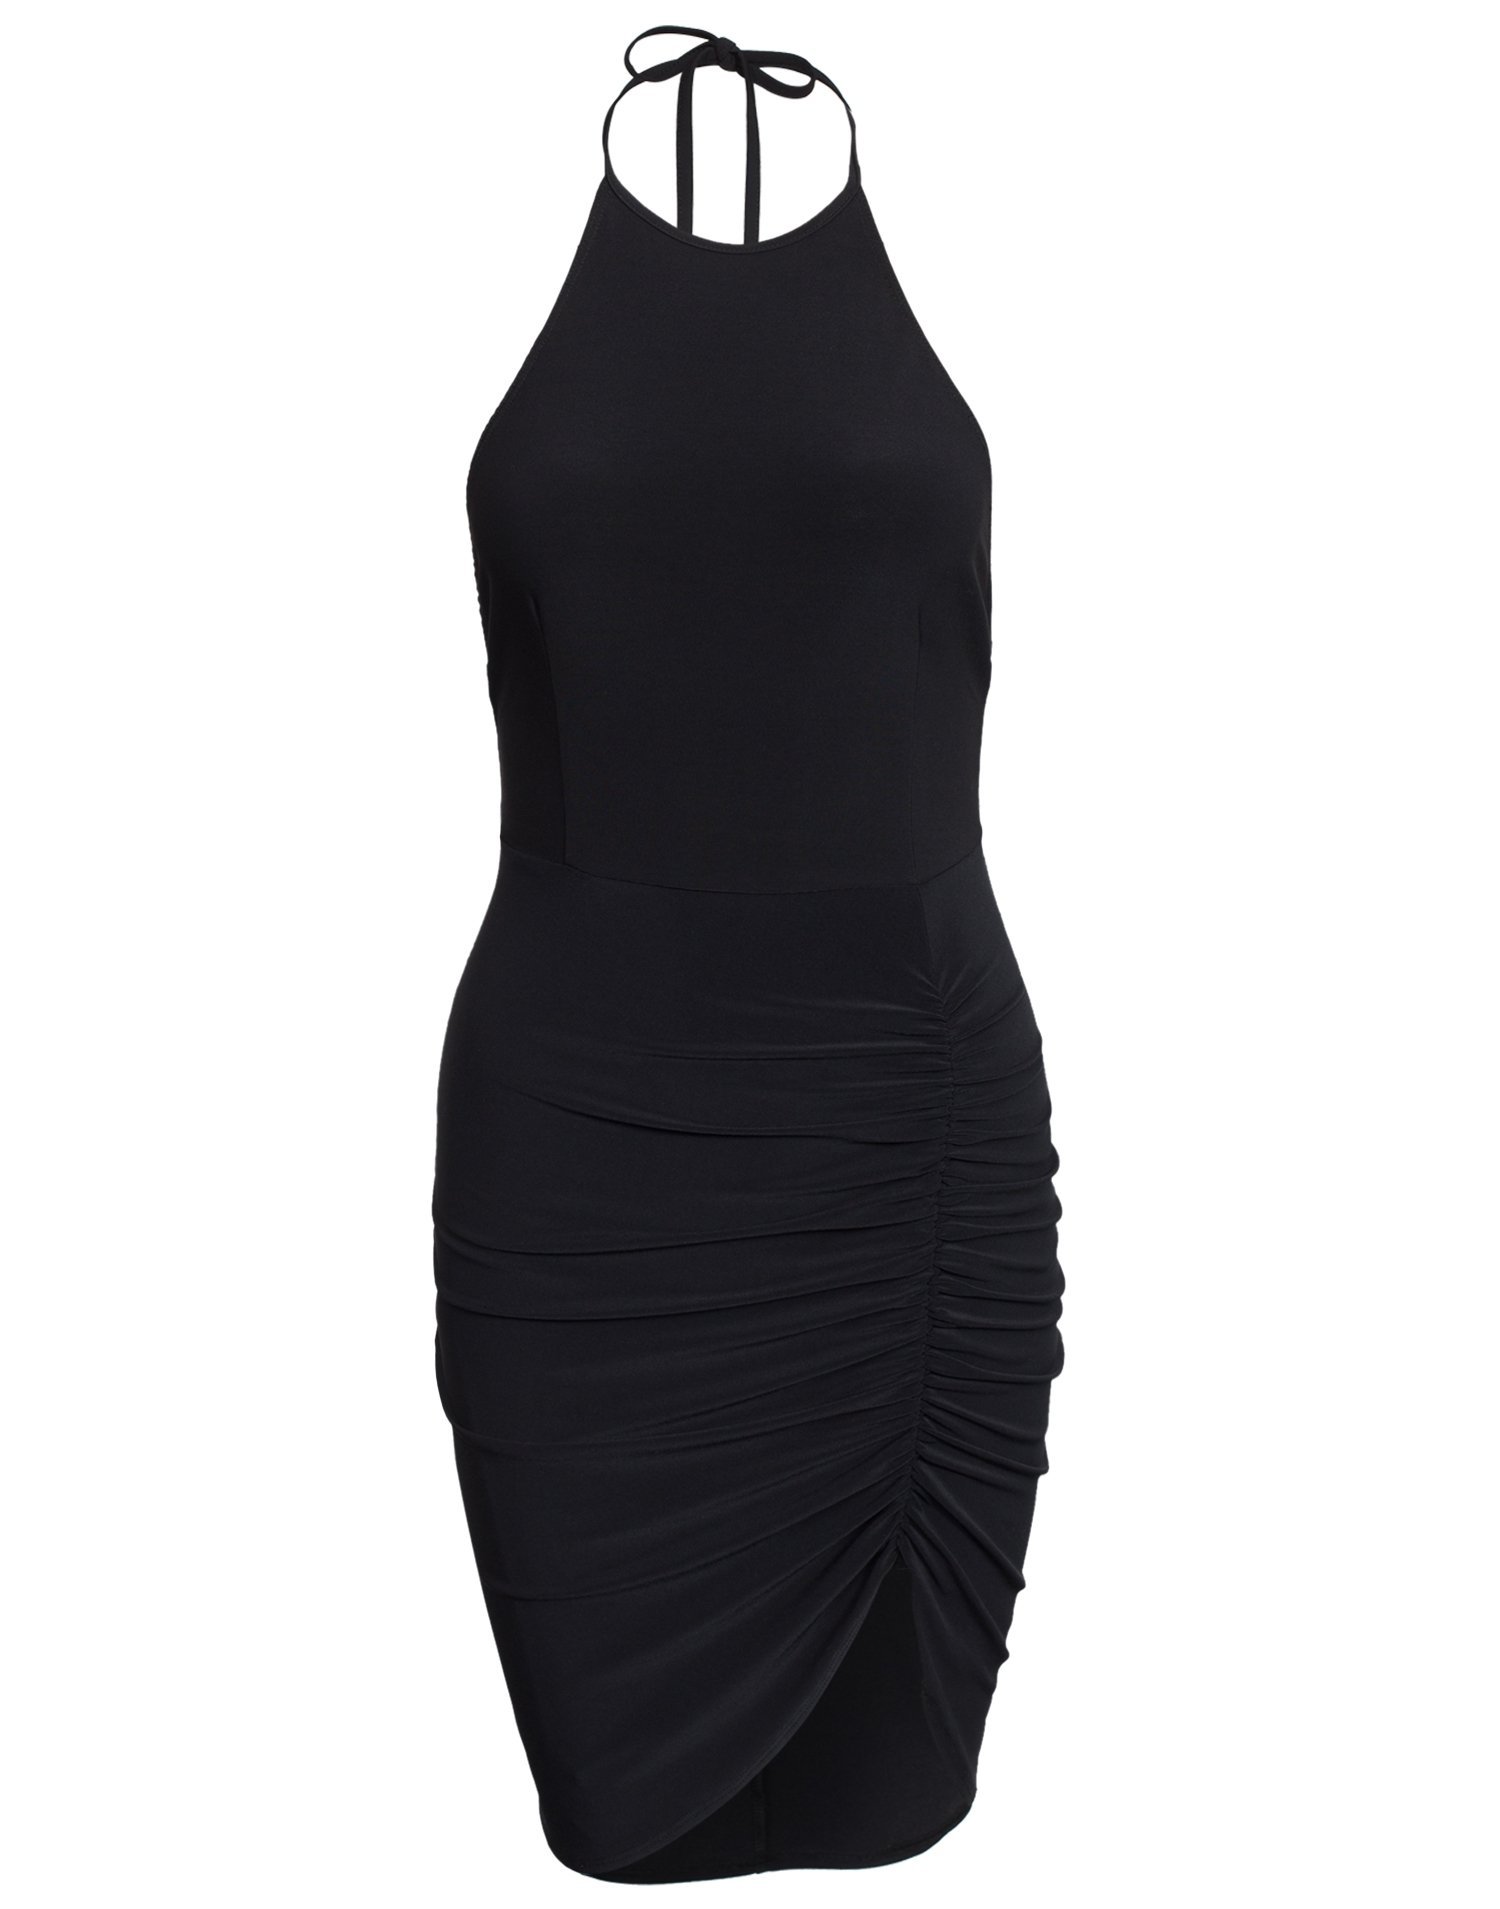 Ruched Thigh Dress - Nly One - Black - Party Dresses - Clothing - Women ...